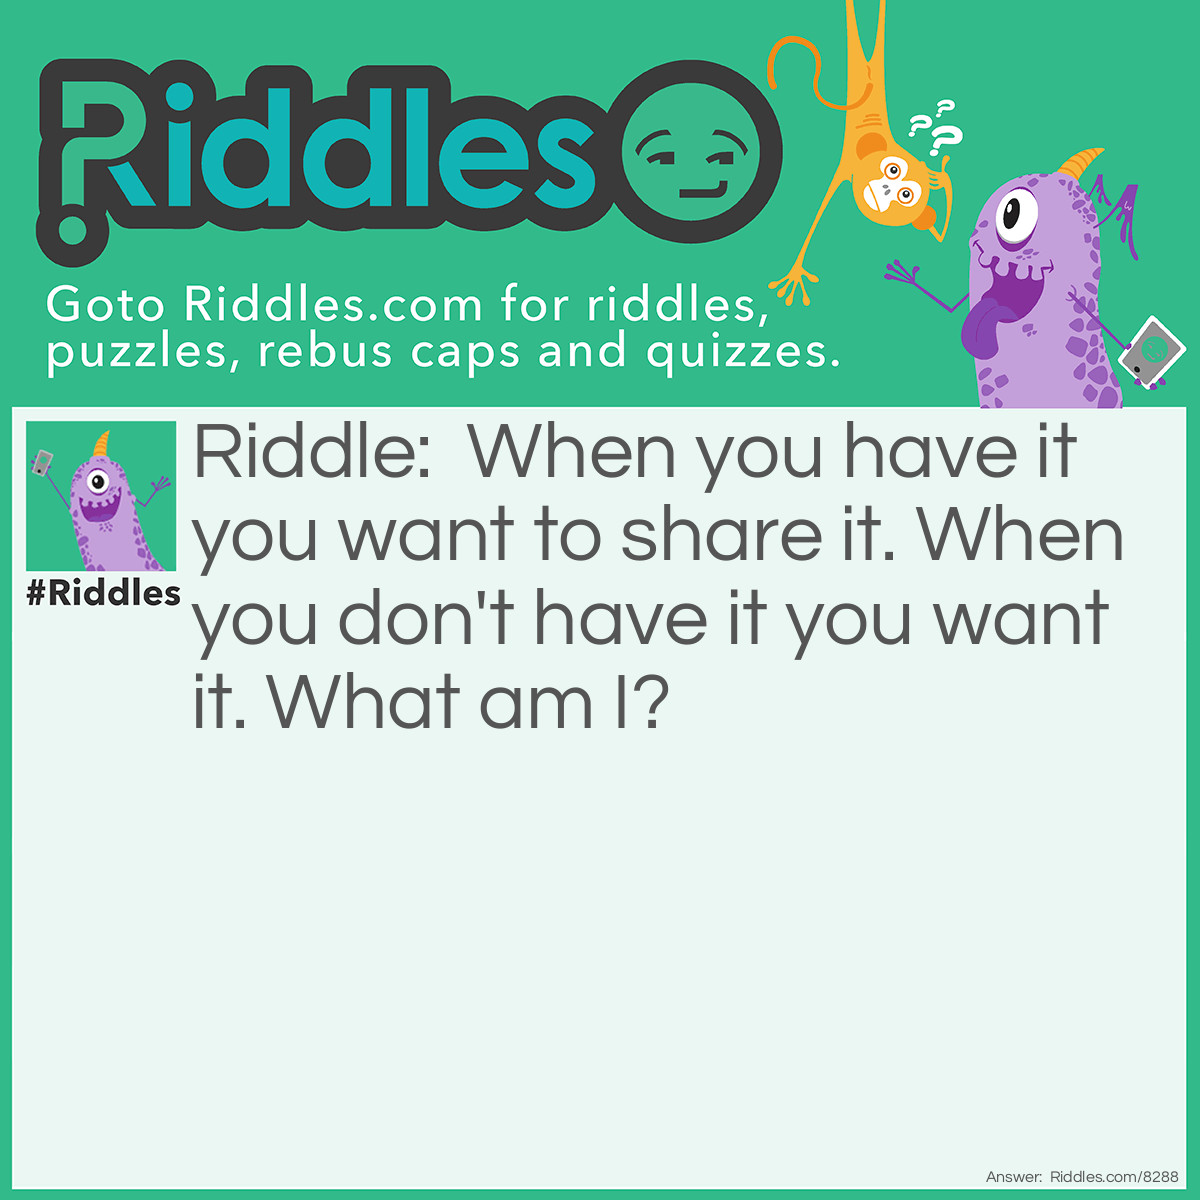 Riddle: When you have it you want to share it. When you don't have it you want it. What am I? Answer: A secret.